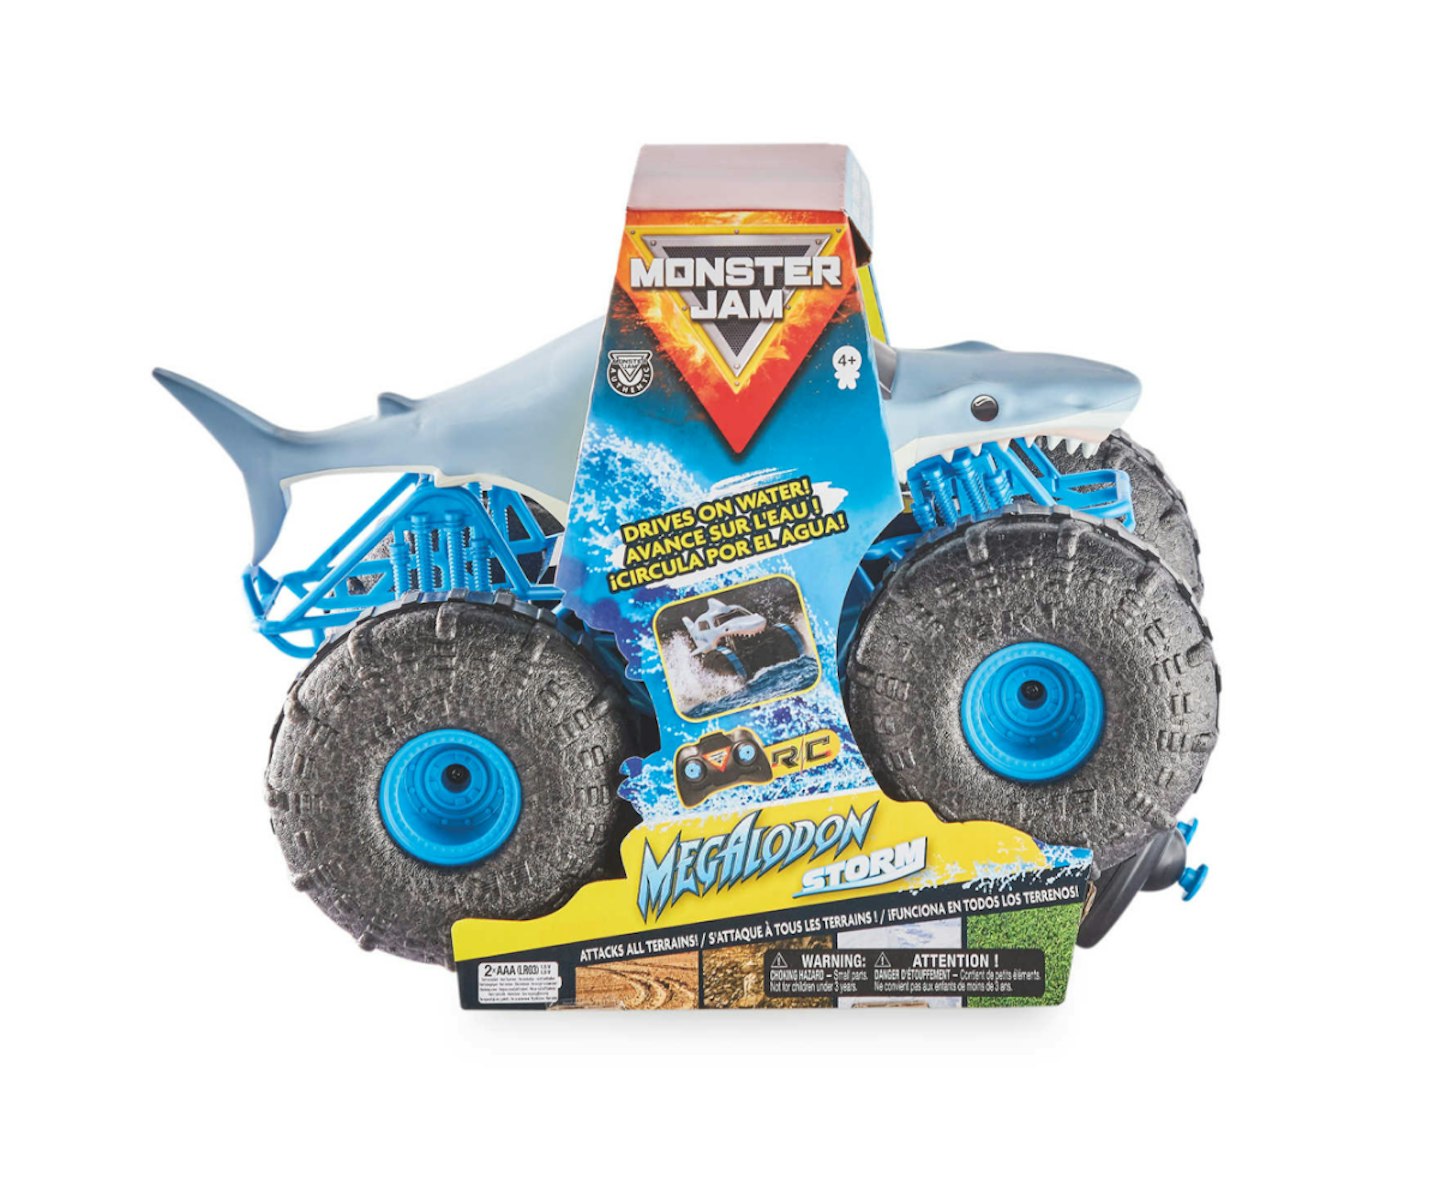 The Best Remote Control Cars for Kids UK 2022